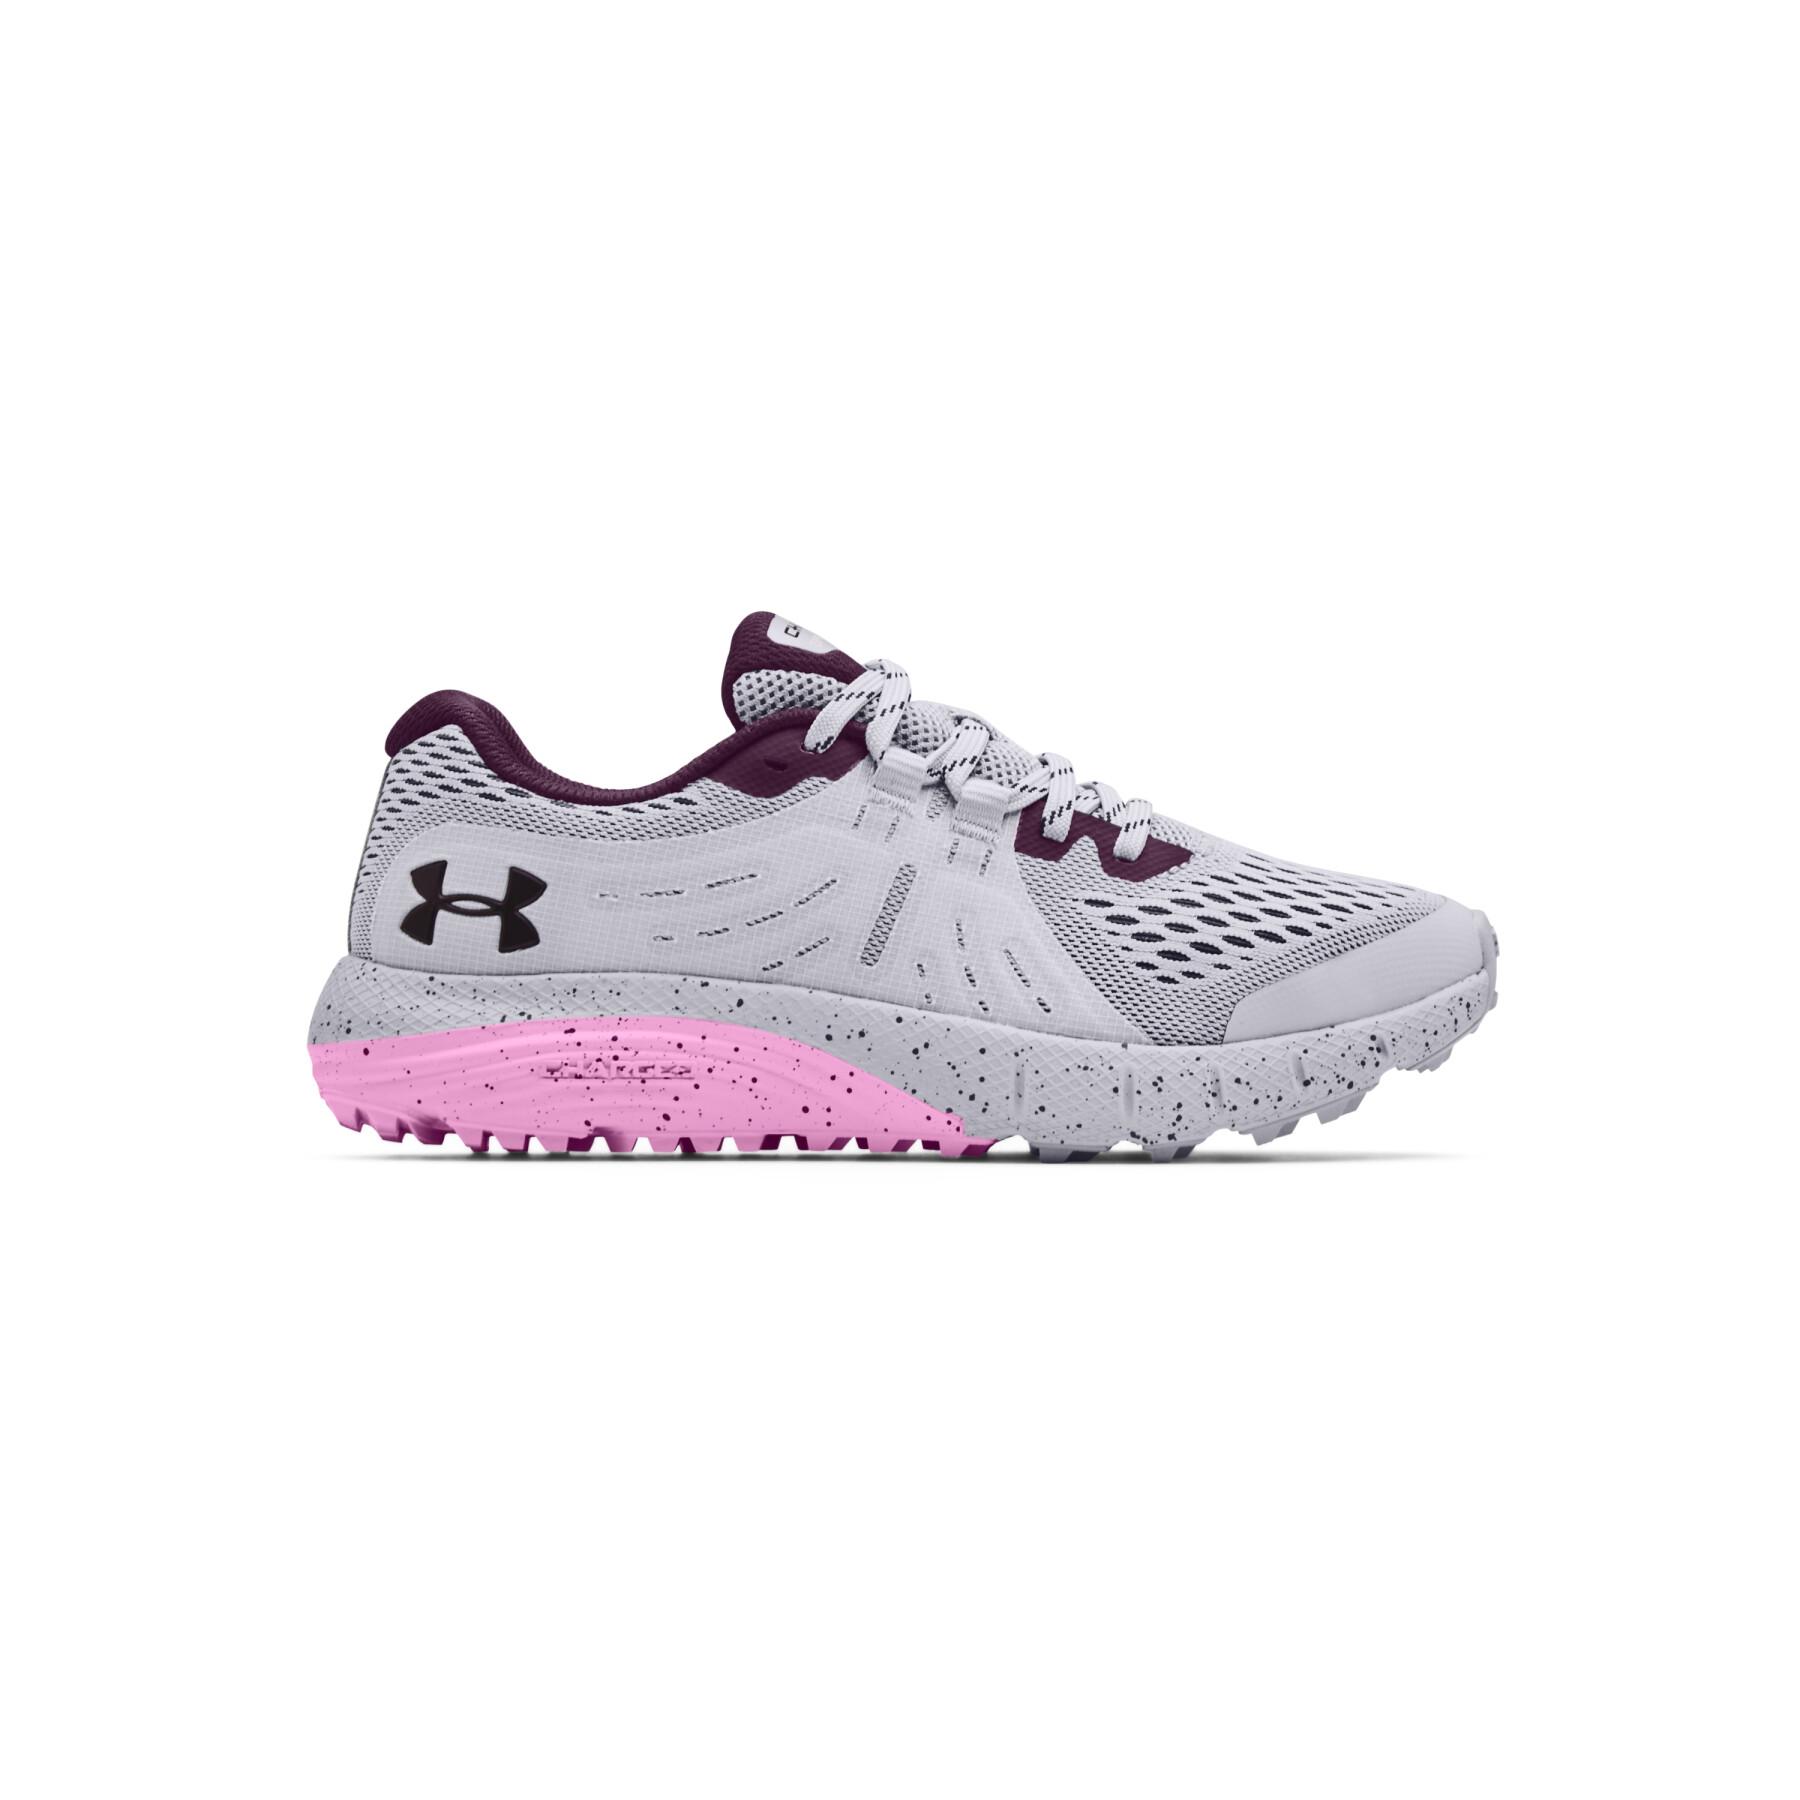 Chaussures de running femme Under Armour Charged Bandit Trail